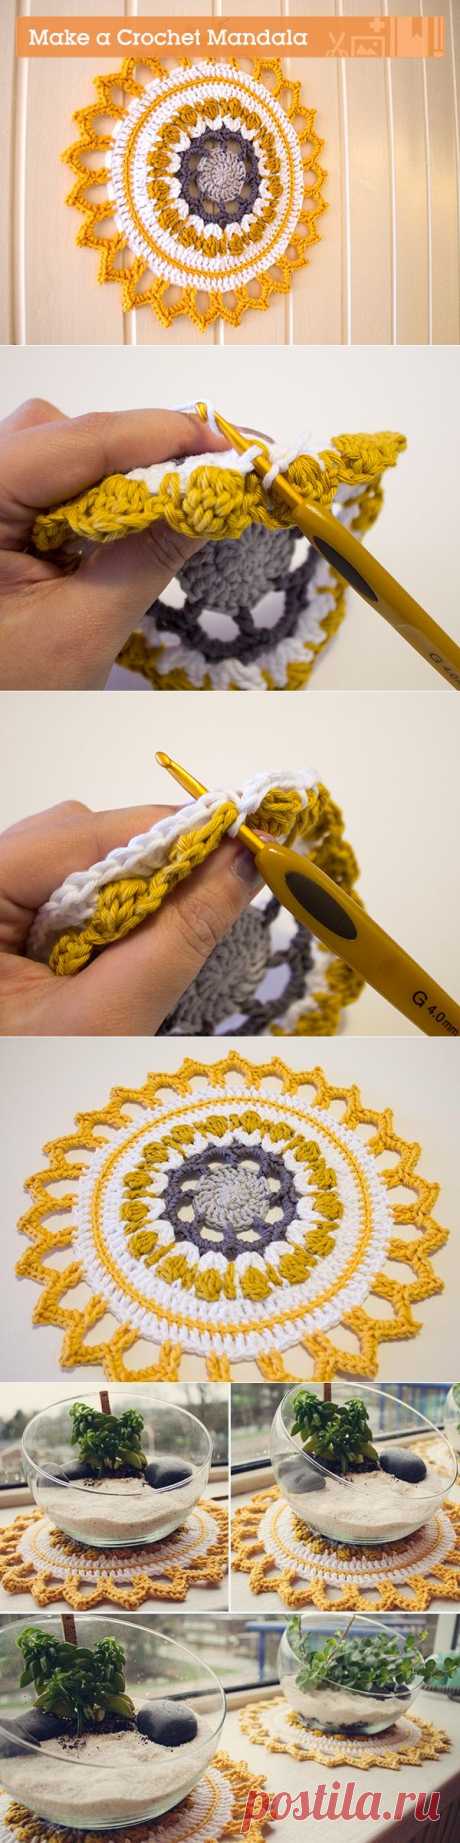 Make a Crochet Mandala For Your Home - Tuts+ Crafts &amp; DIY Article